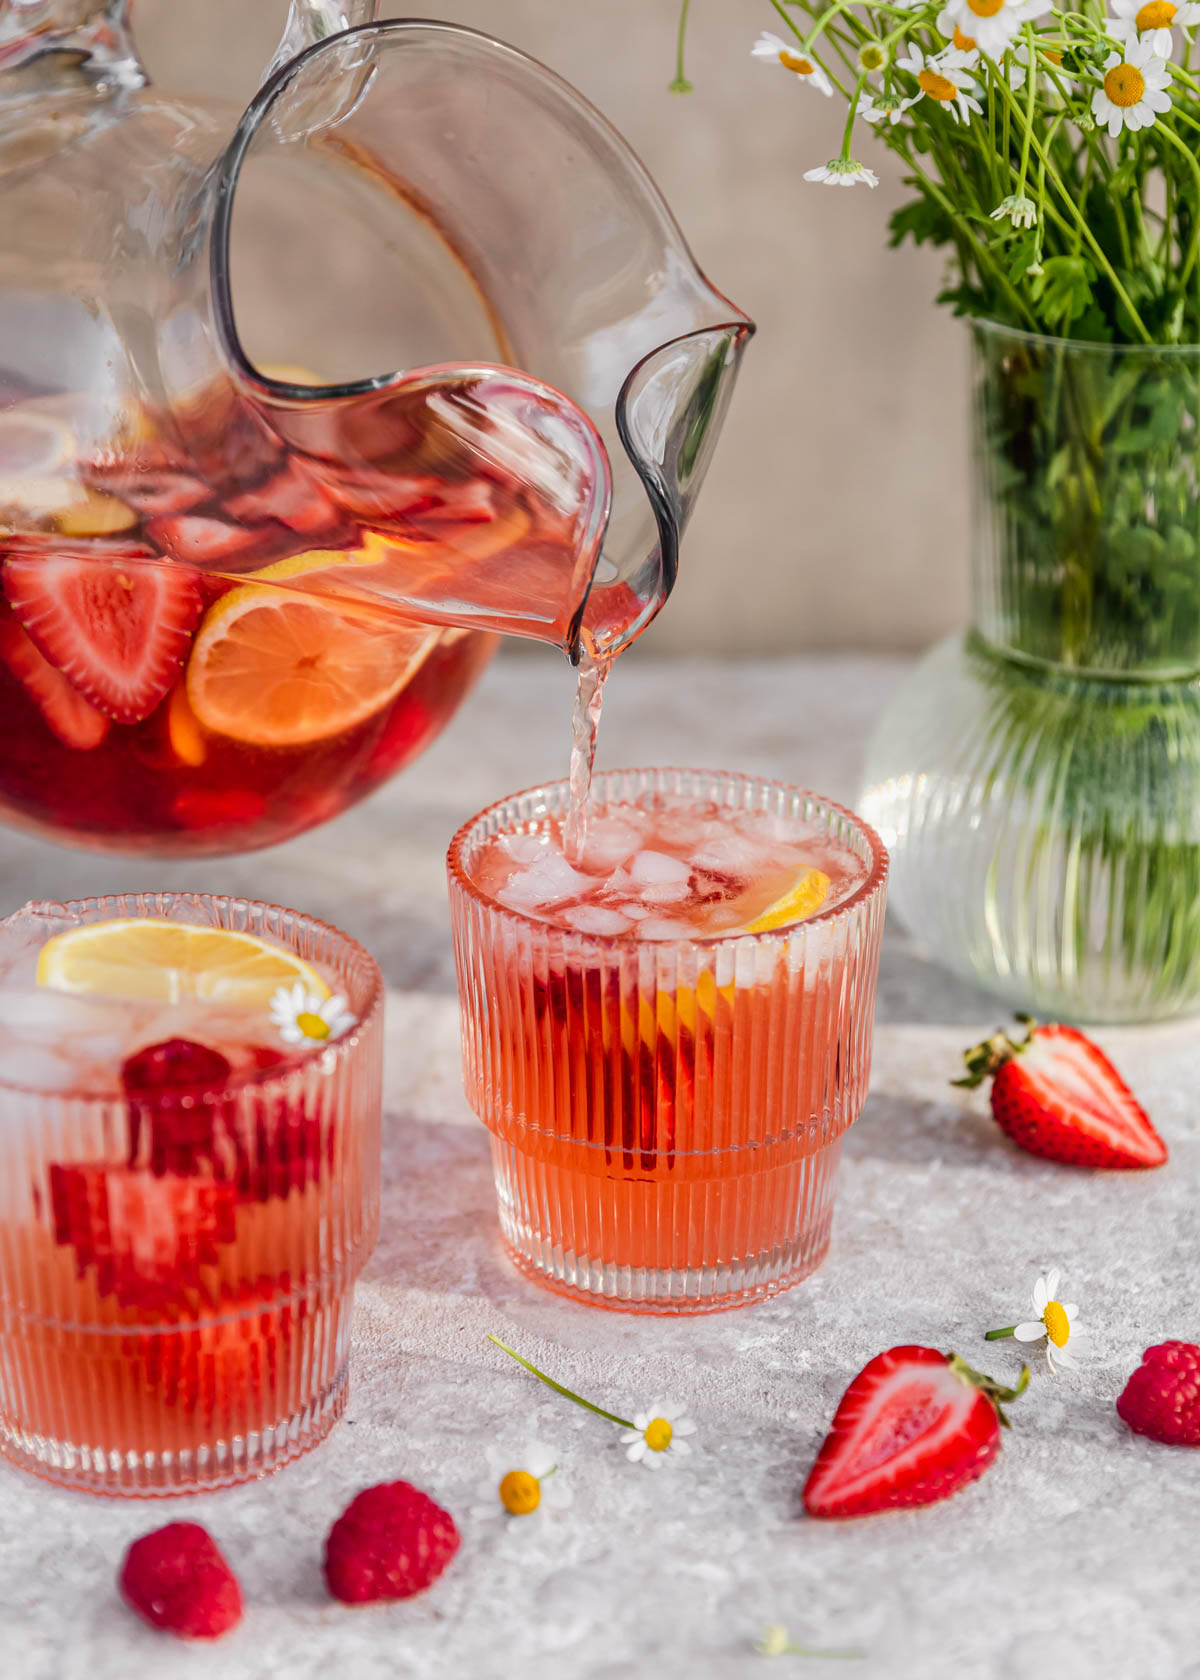 Rosé sangria being poured from a pitcher into a glass next to another glass of sangria and a vase of white flowers on a beige background.